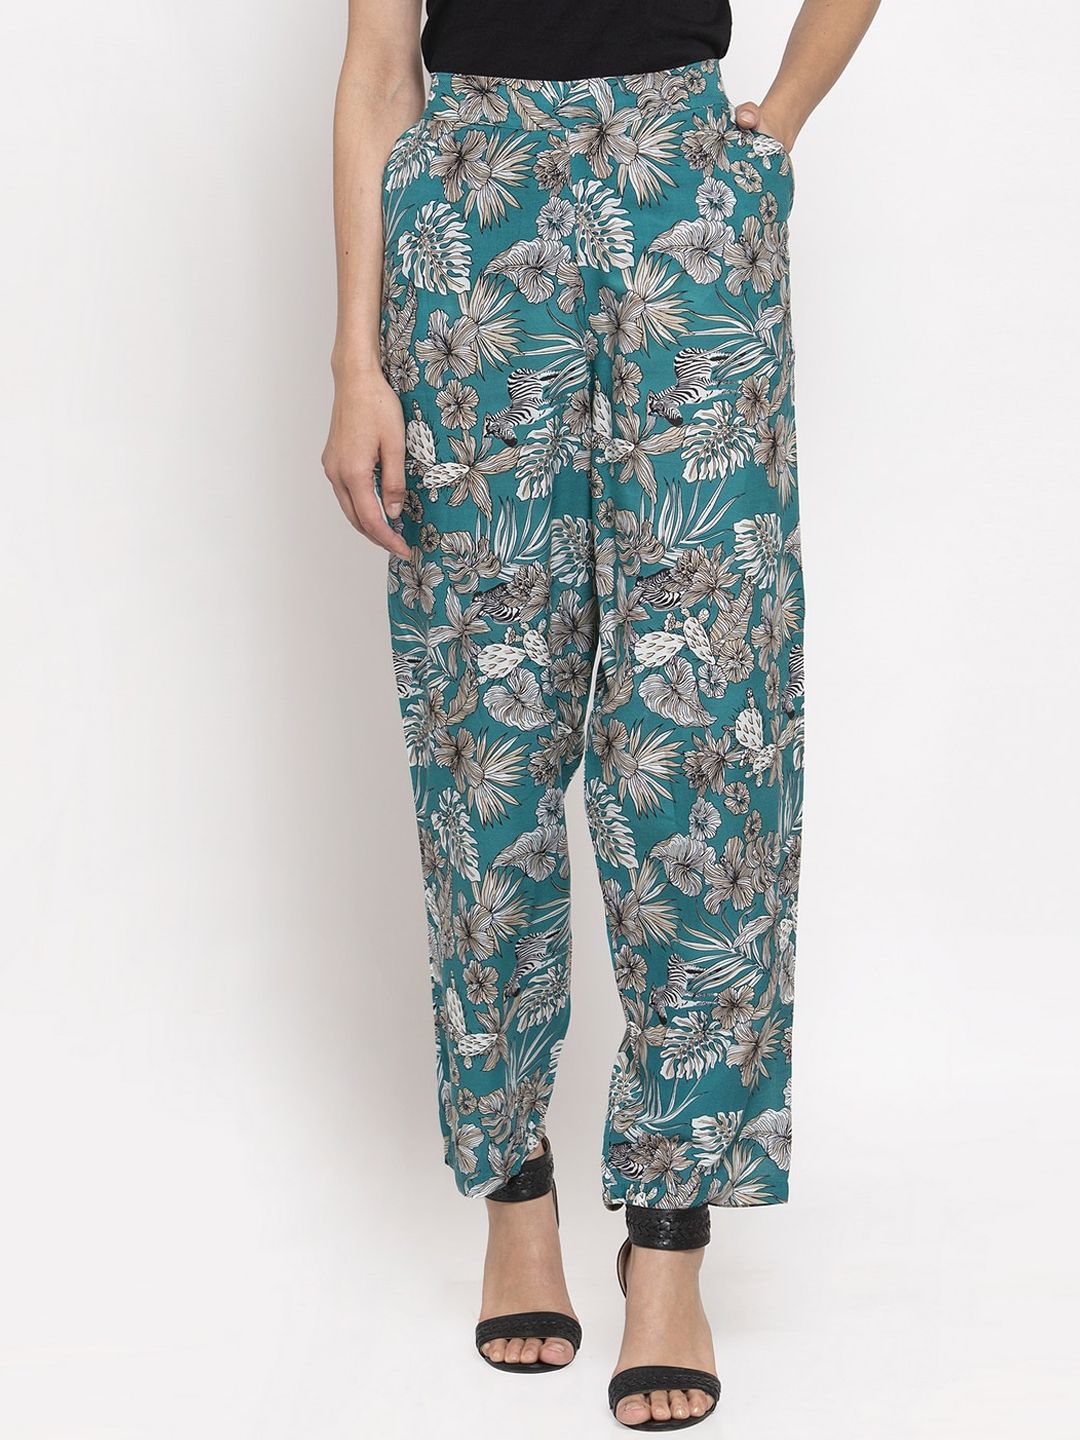 TAG 7 Women Teal & White Smart Regular Fit Printed Parallel Trousers Price in India